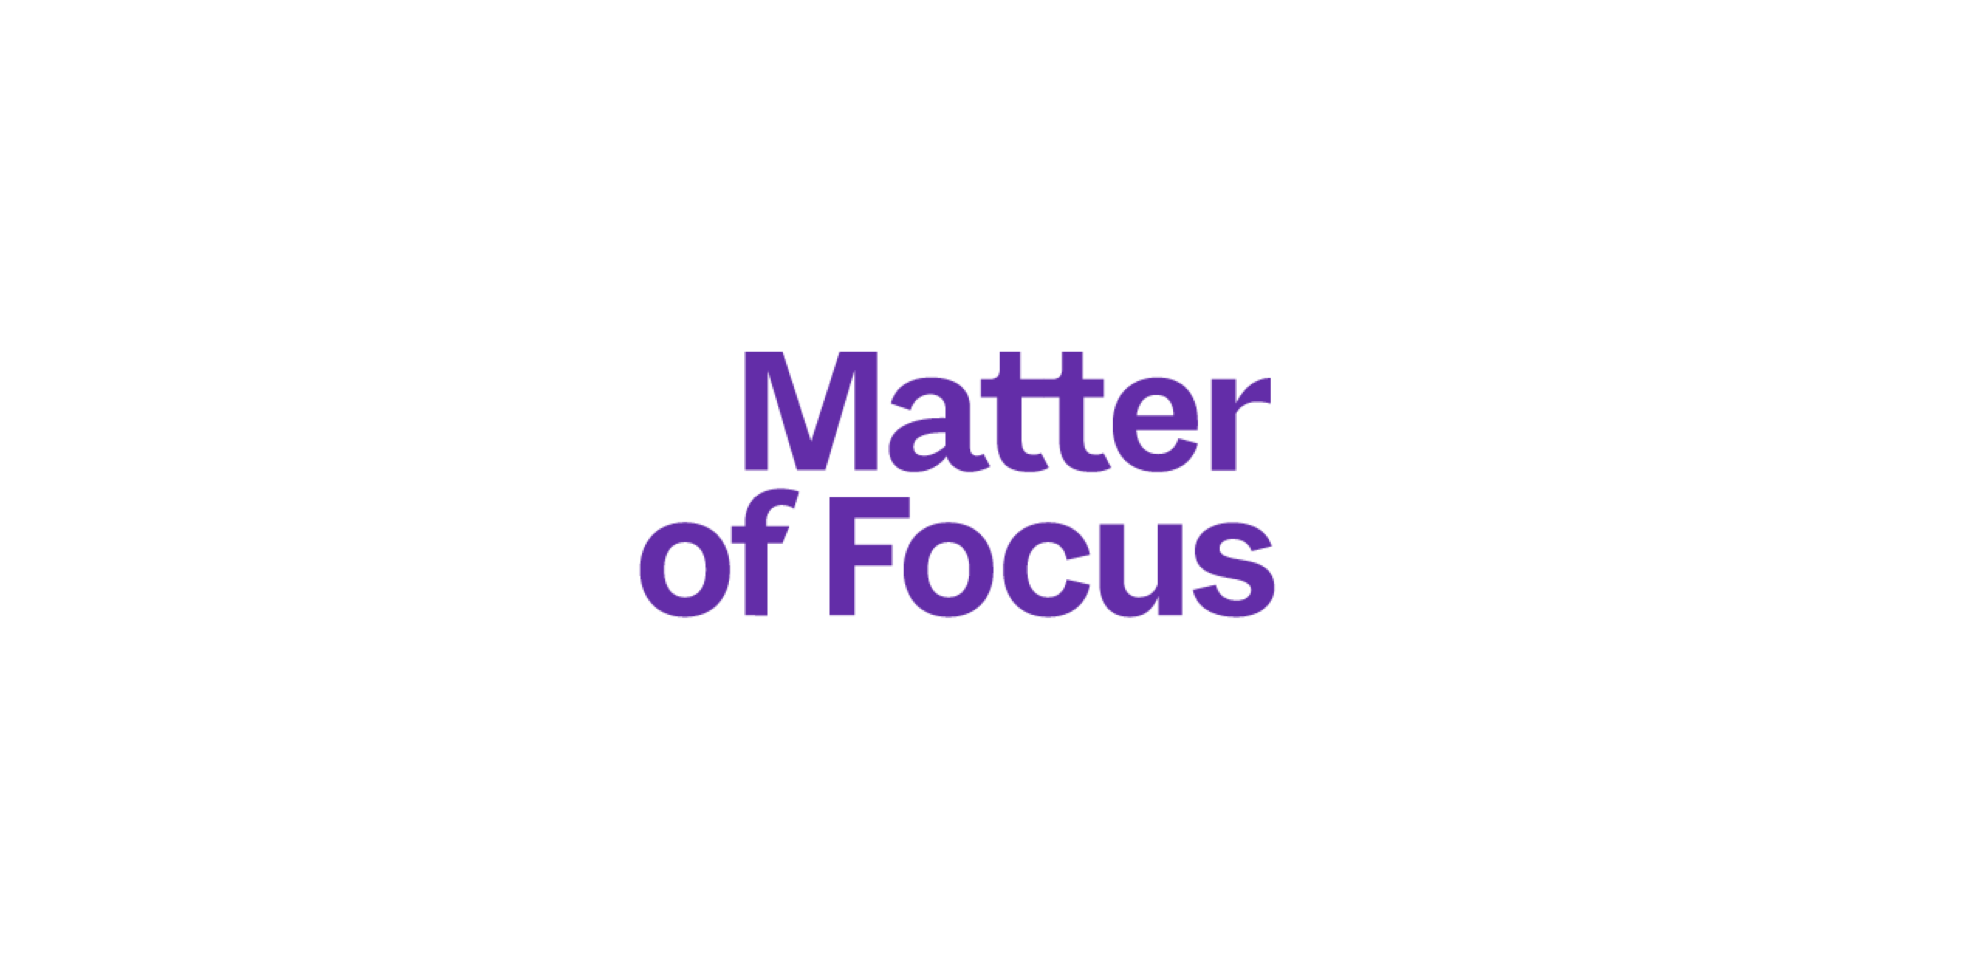 A white background with text in blue “Matter of Focus”